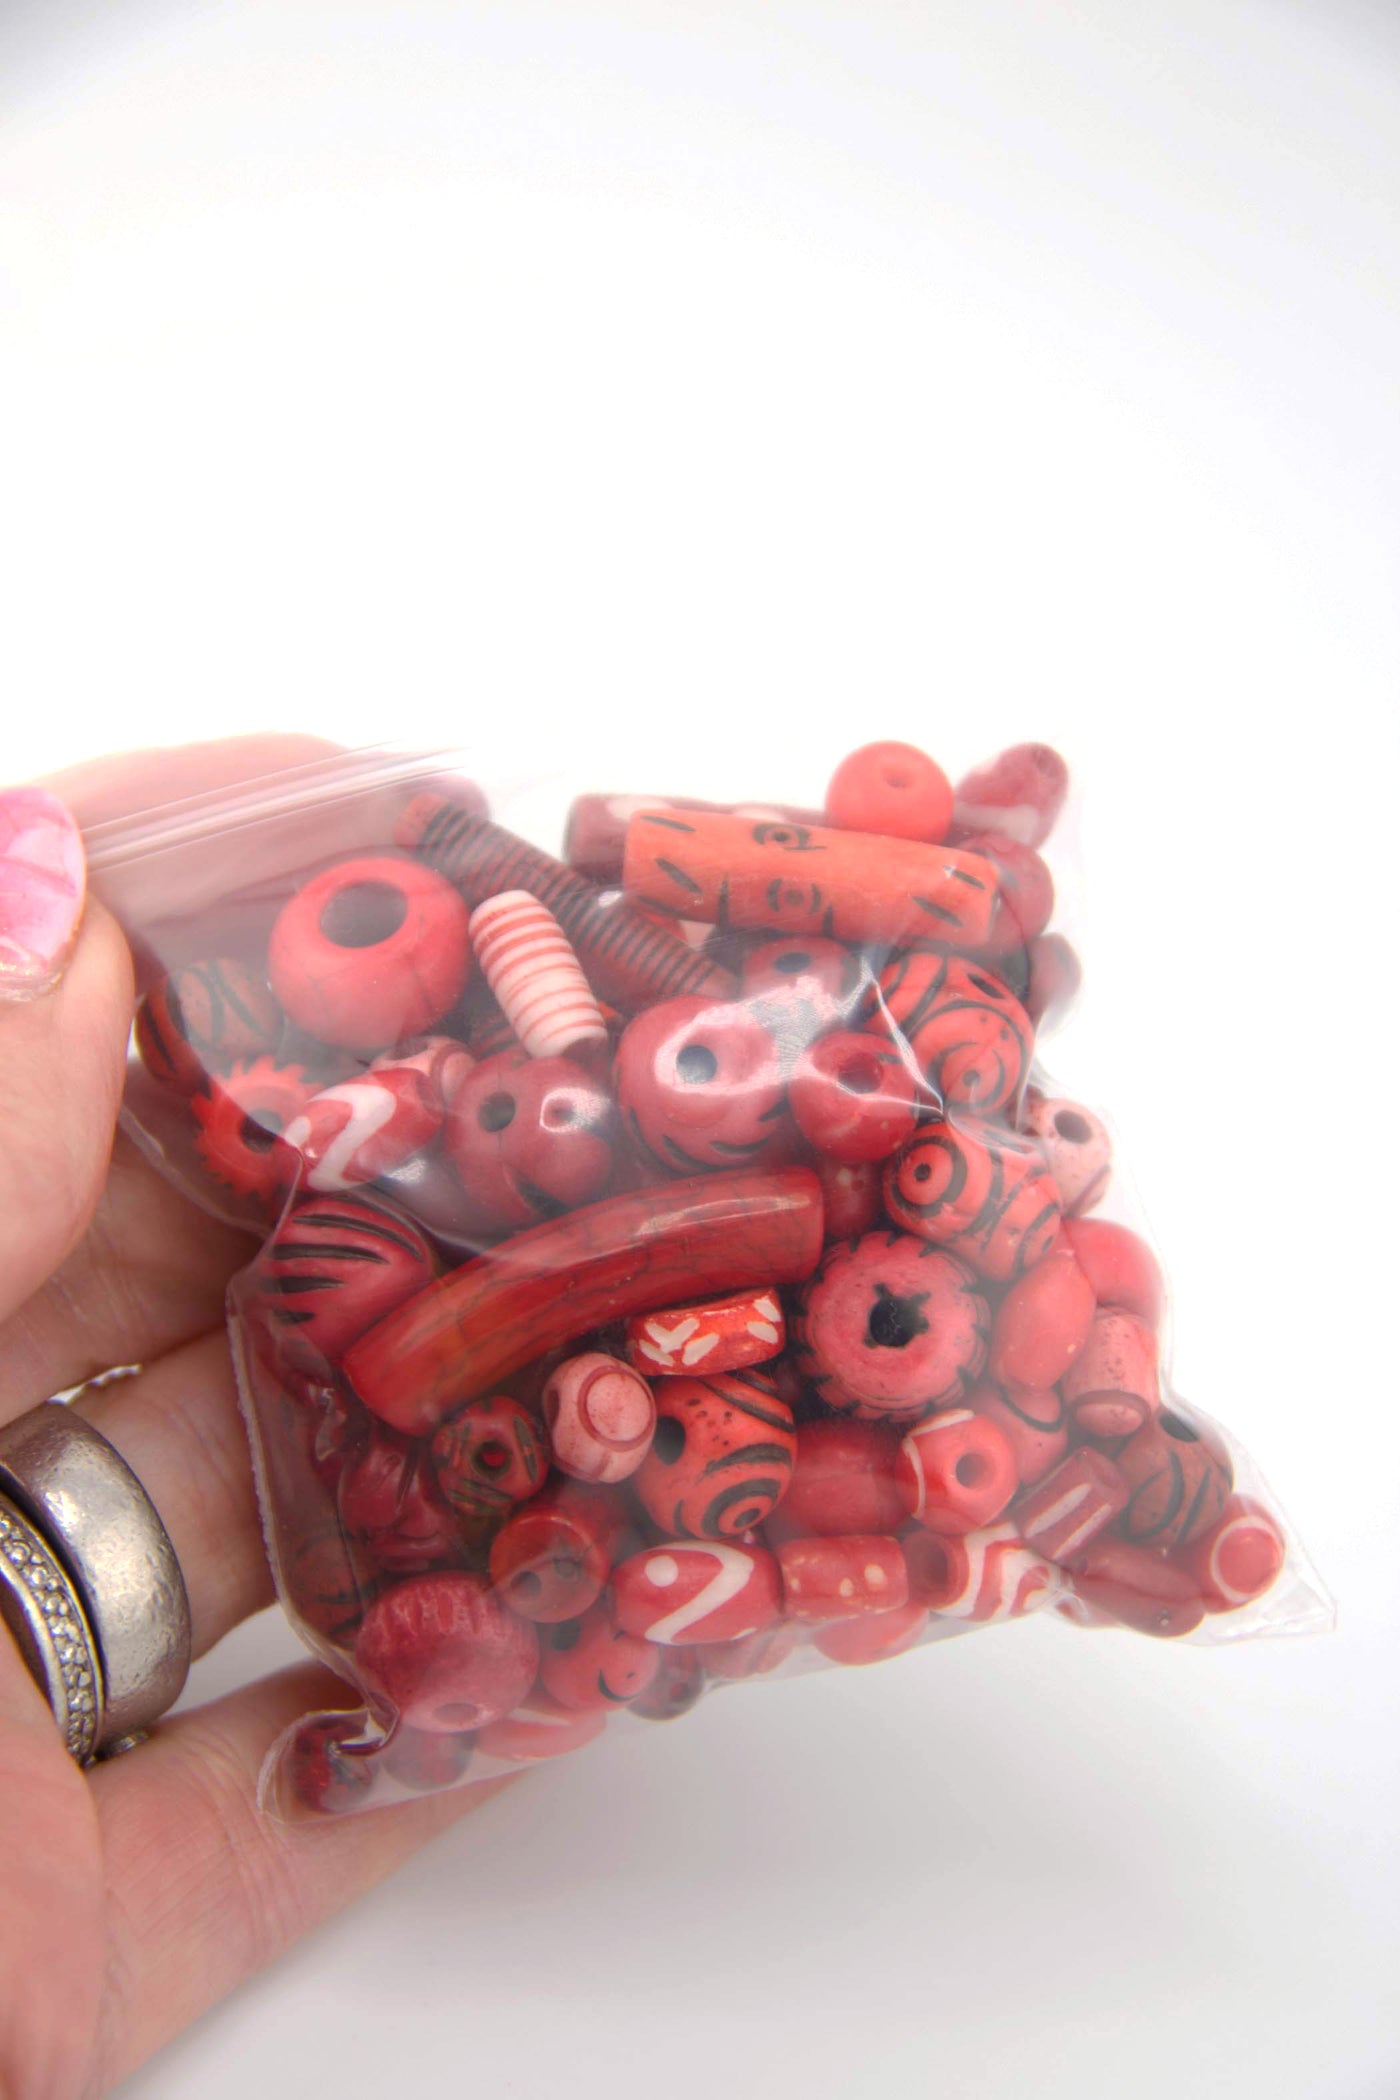 Beads for making DIY Jewelry for the root chakra, red bead grab bag.